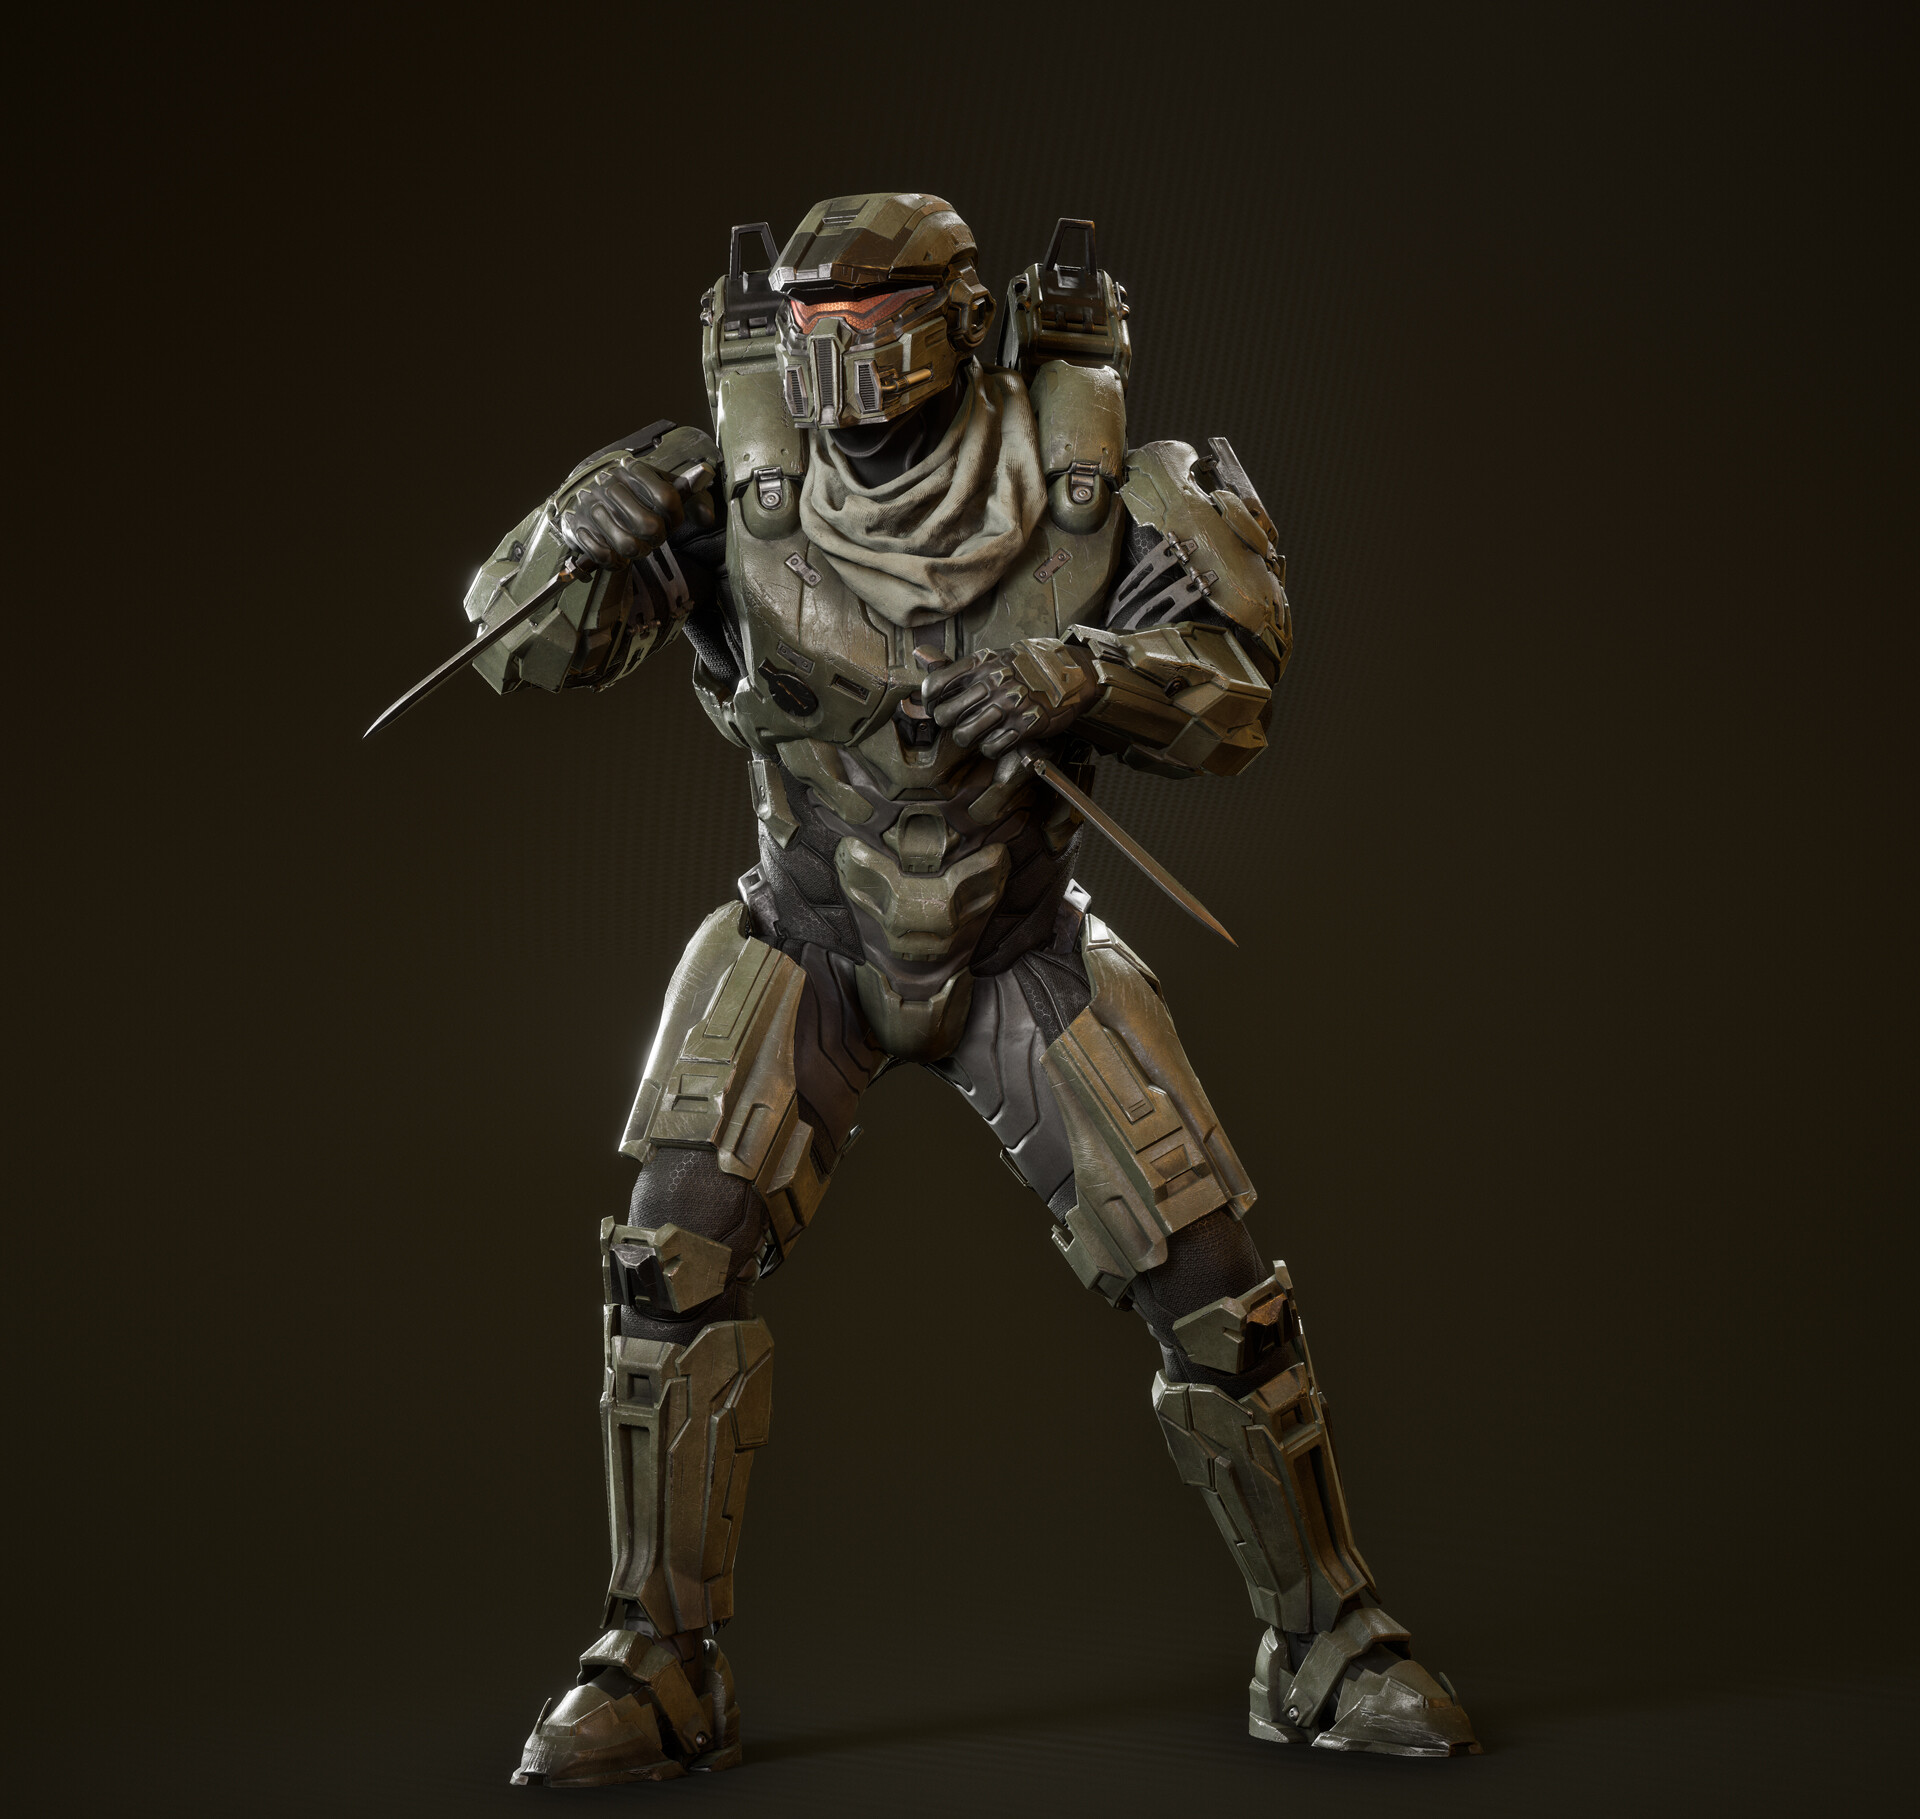 ArtStation - Fred- 104 early concept for Halo 5